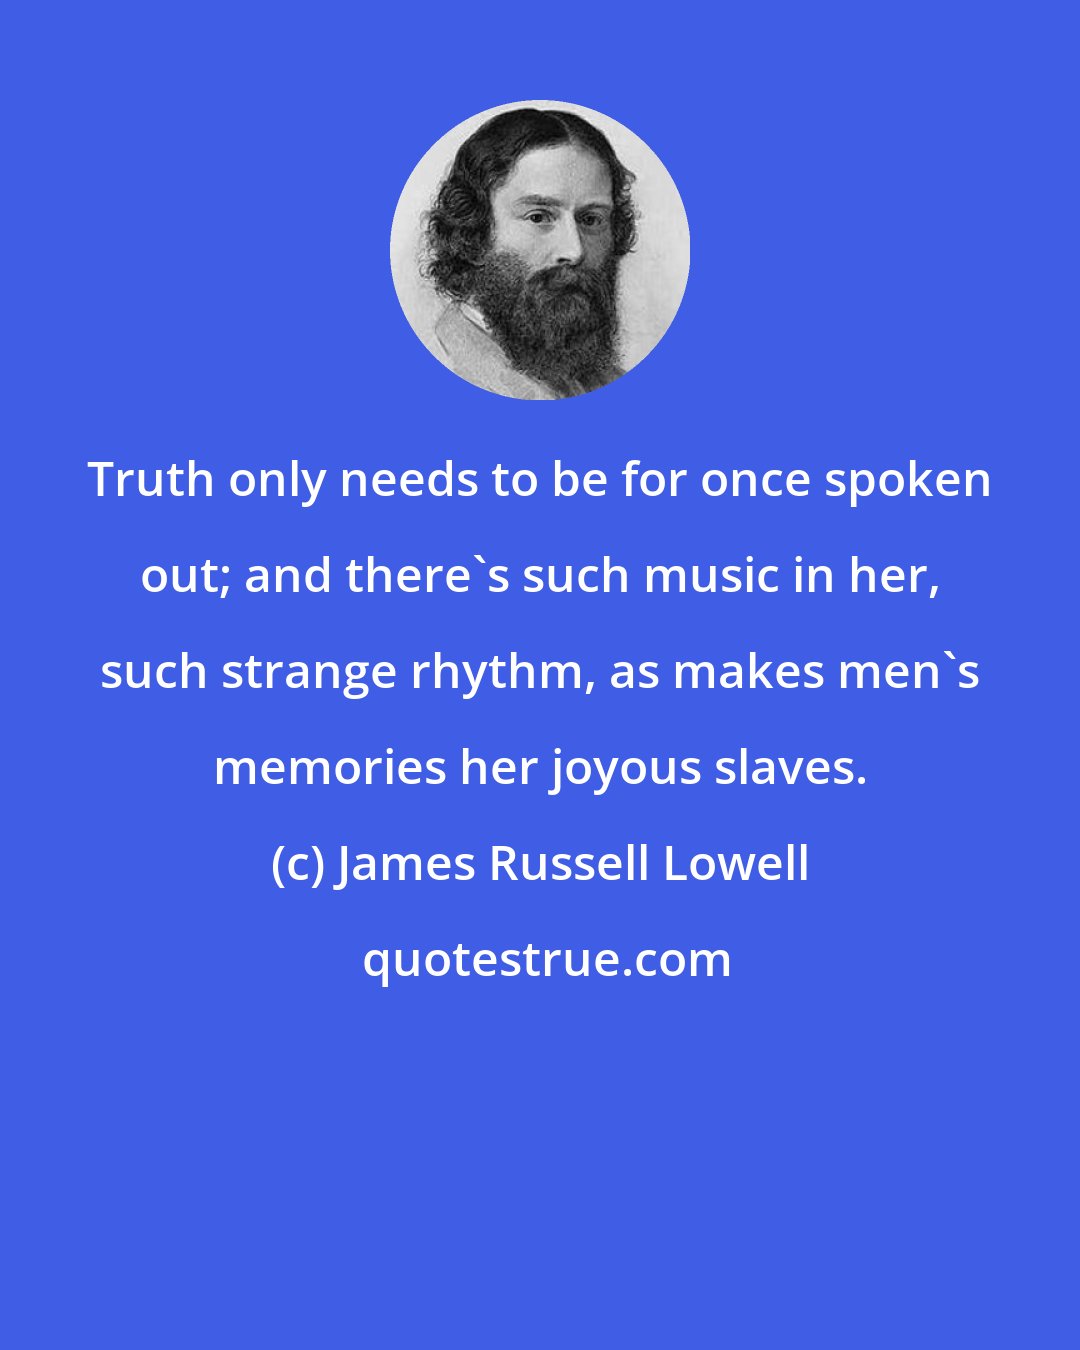 James Russell Lowell: Truth only needs to be for once spoken out; and there's such music in her, such strange rhythm, as makes men's memories her joyous slaves.